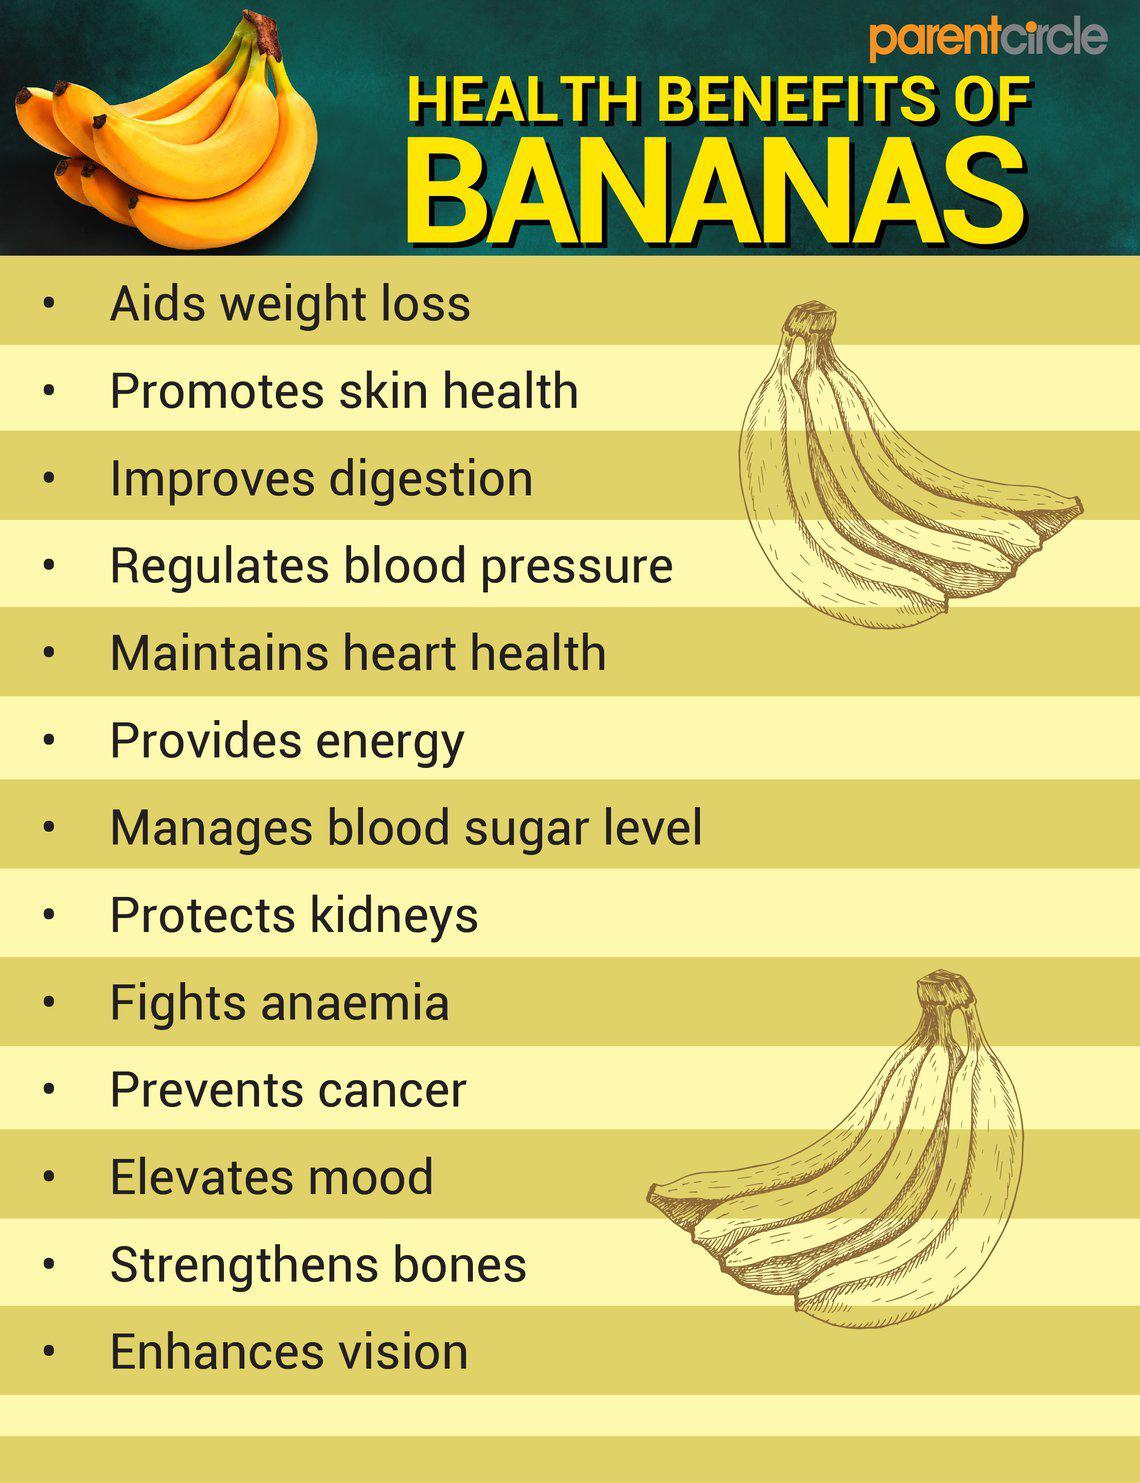 Banana Health Benefits and Calories, Banana Nutritional Value, Facts and  Side Effects | ParentCircle